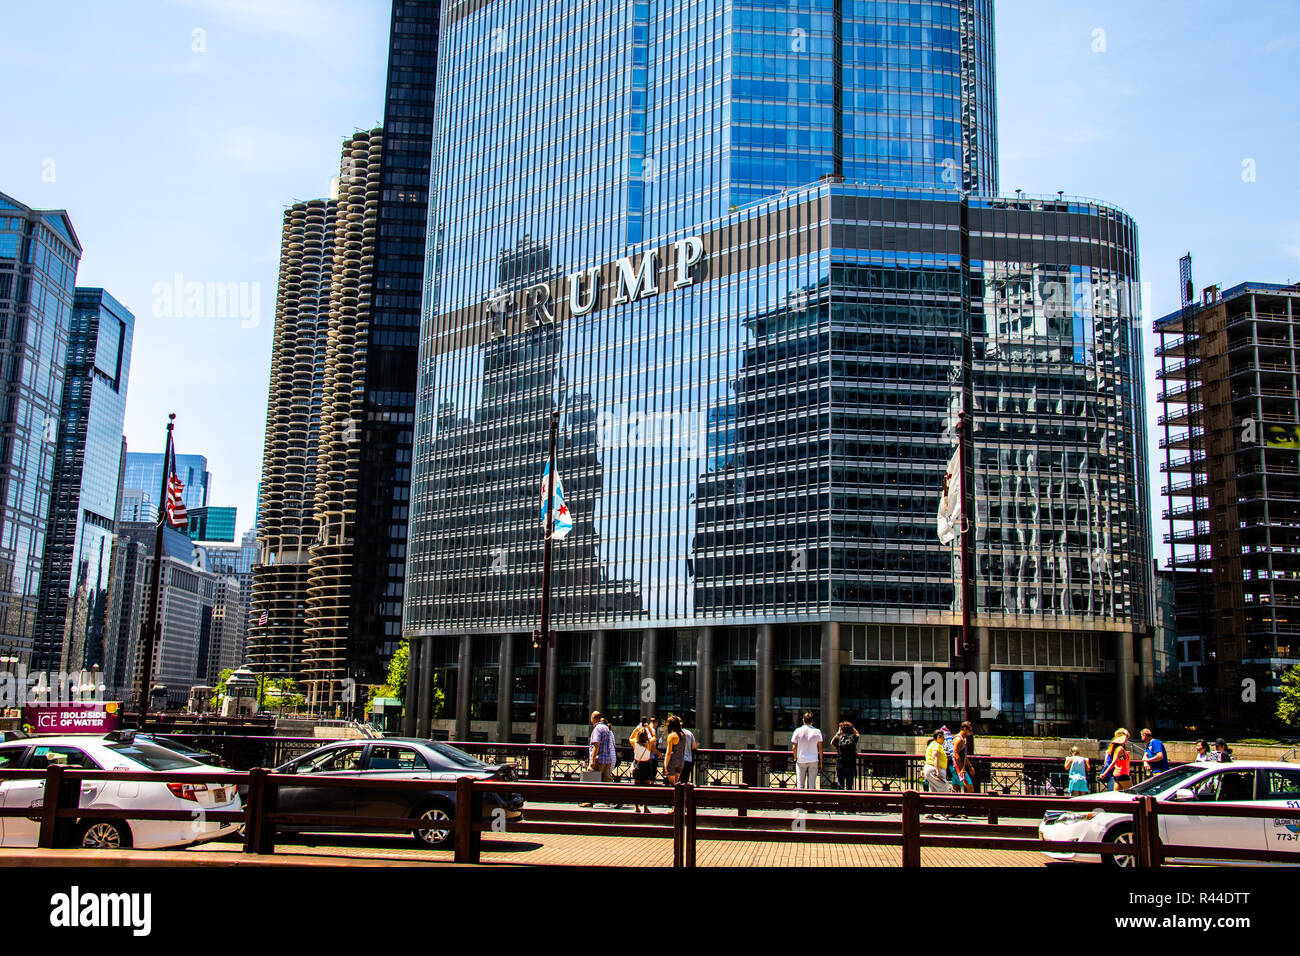 Trump International Hotel & Tower, Chicago, Illinois, USA Banque D'Images